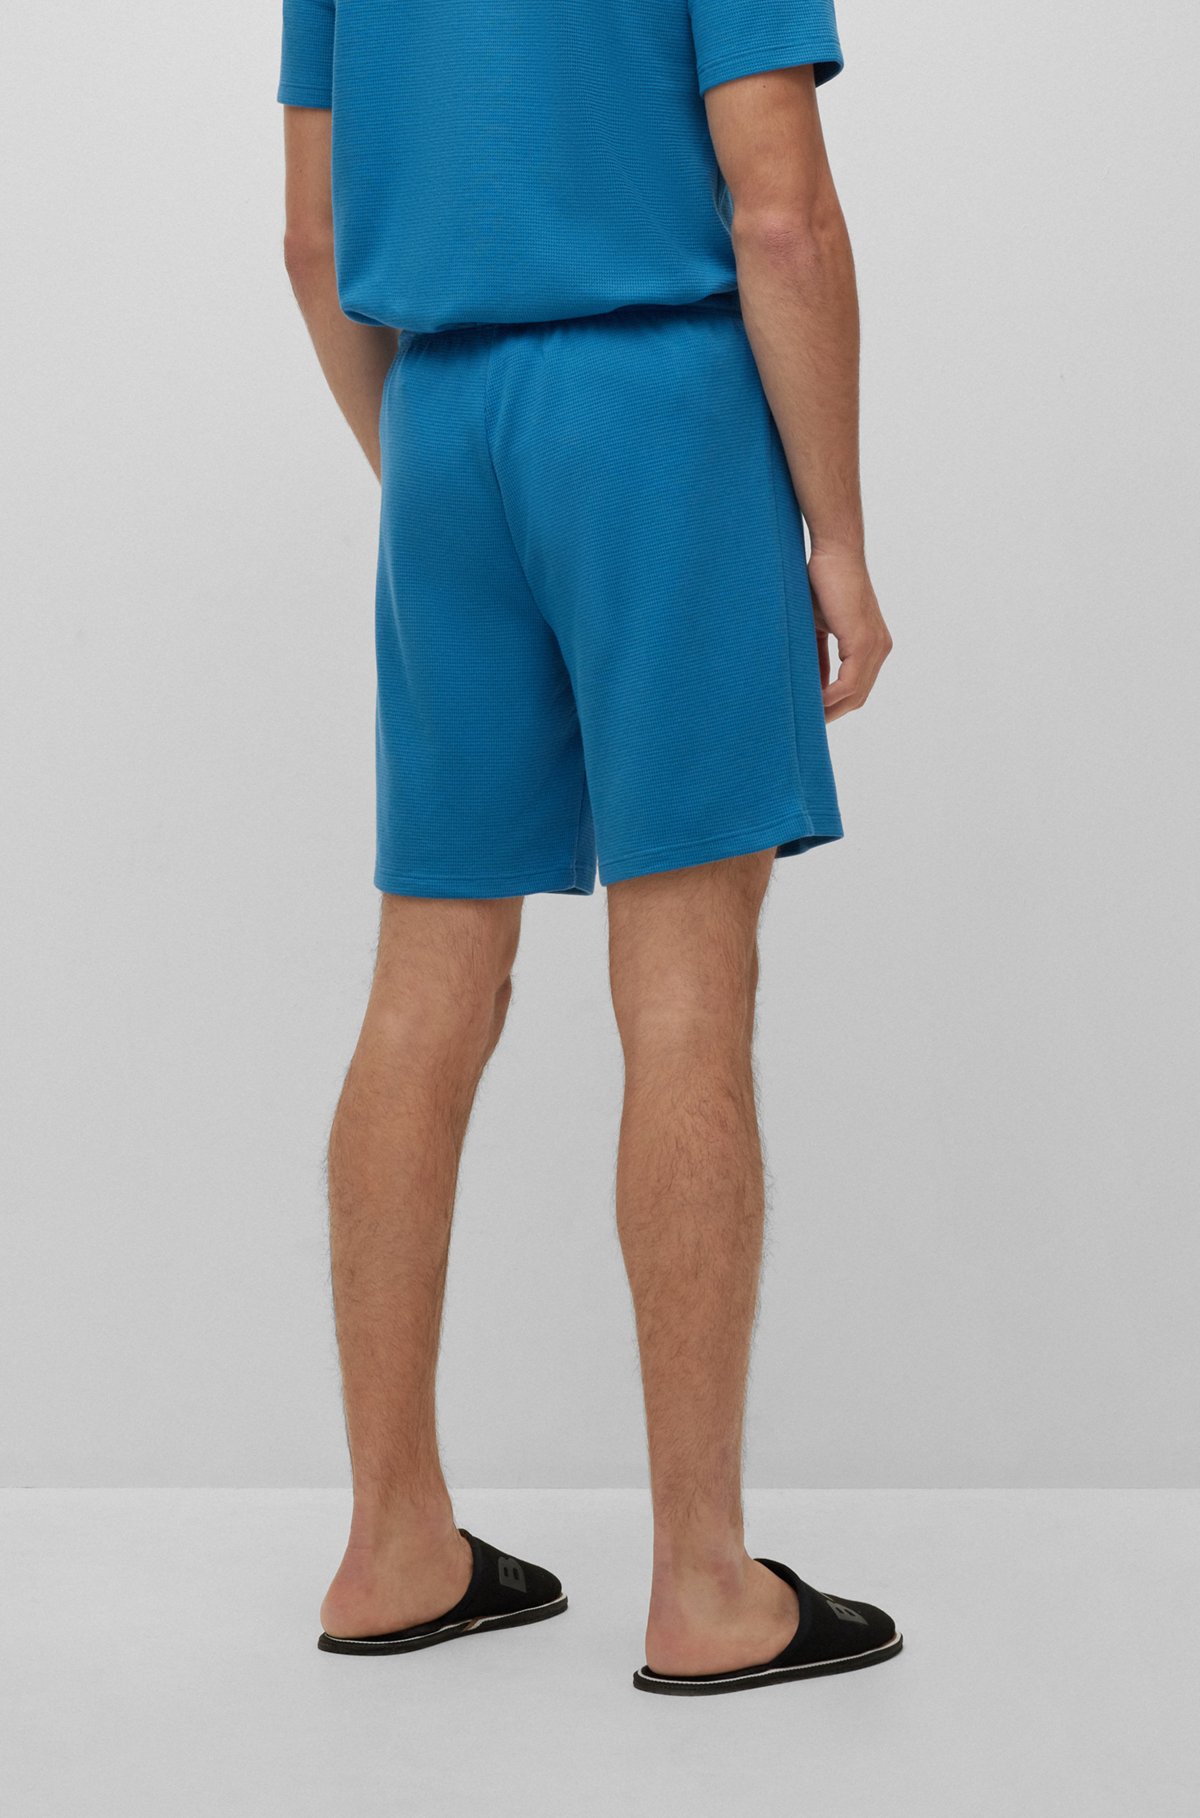 BOSS - Pajama shorts with embroidered logo